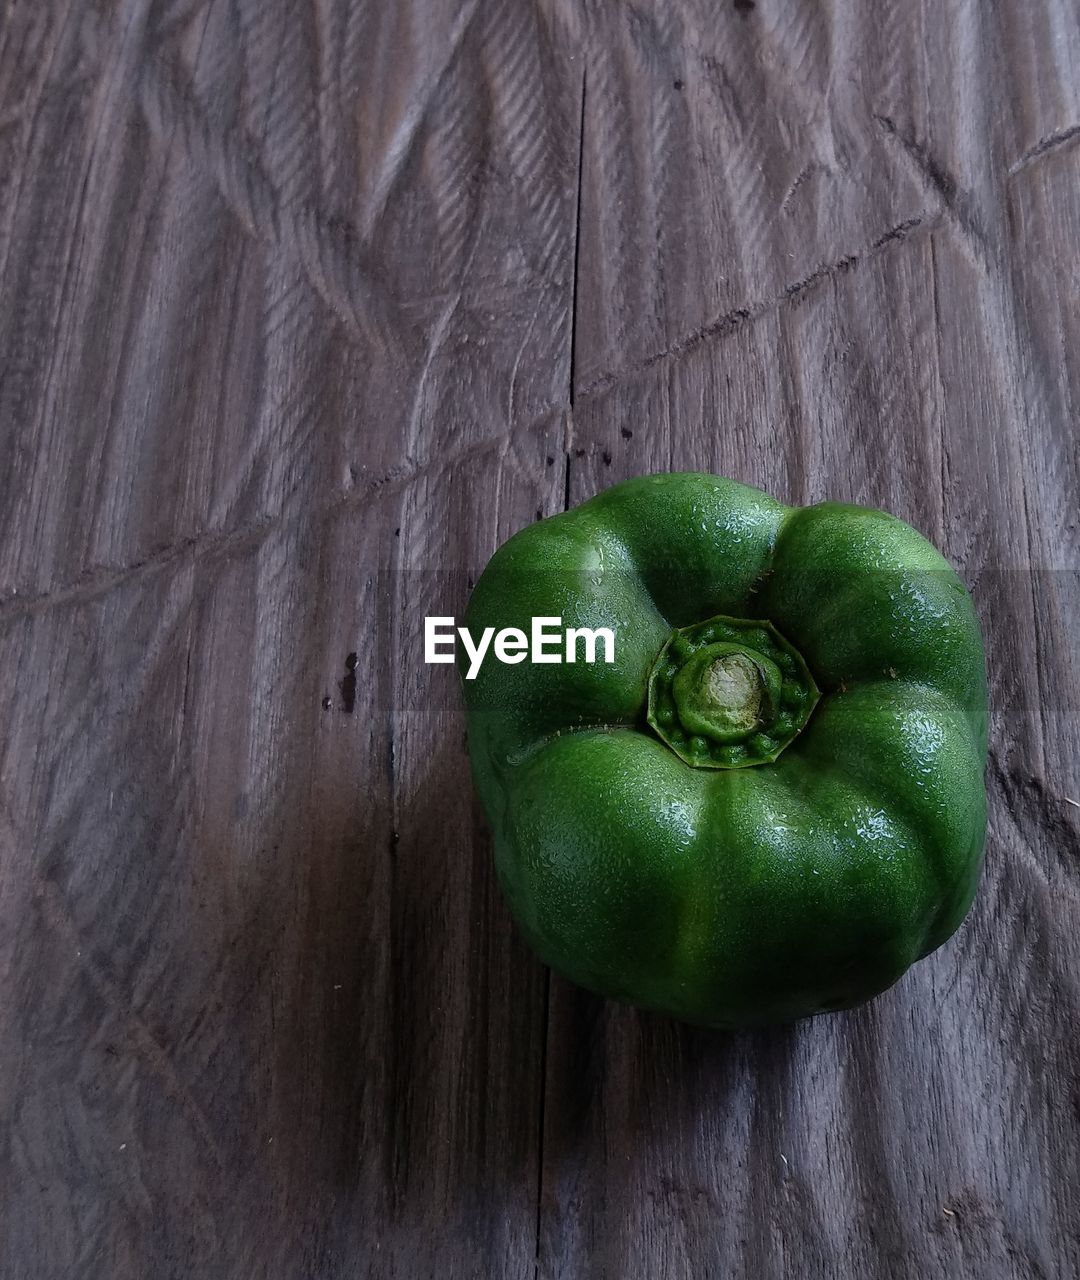 green, food and drink, food, healthy eating, wellbeing, freshness, vegetable, plant, bell pepper, produce, wood, no people, indoors, still life, fruit, close-up, table, studio shot, high angle view, flower, organic, bell peppers and chili peppers, directly above, pepper, capsicum